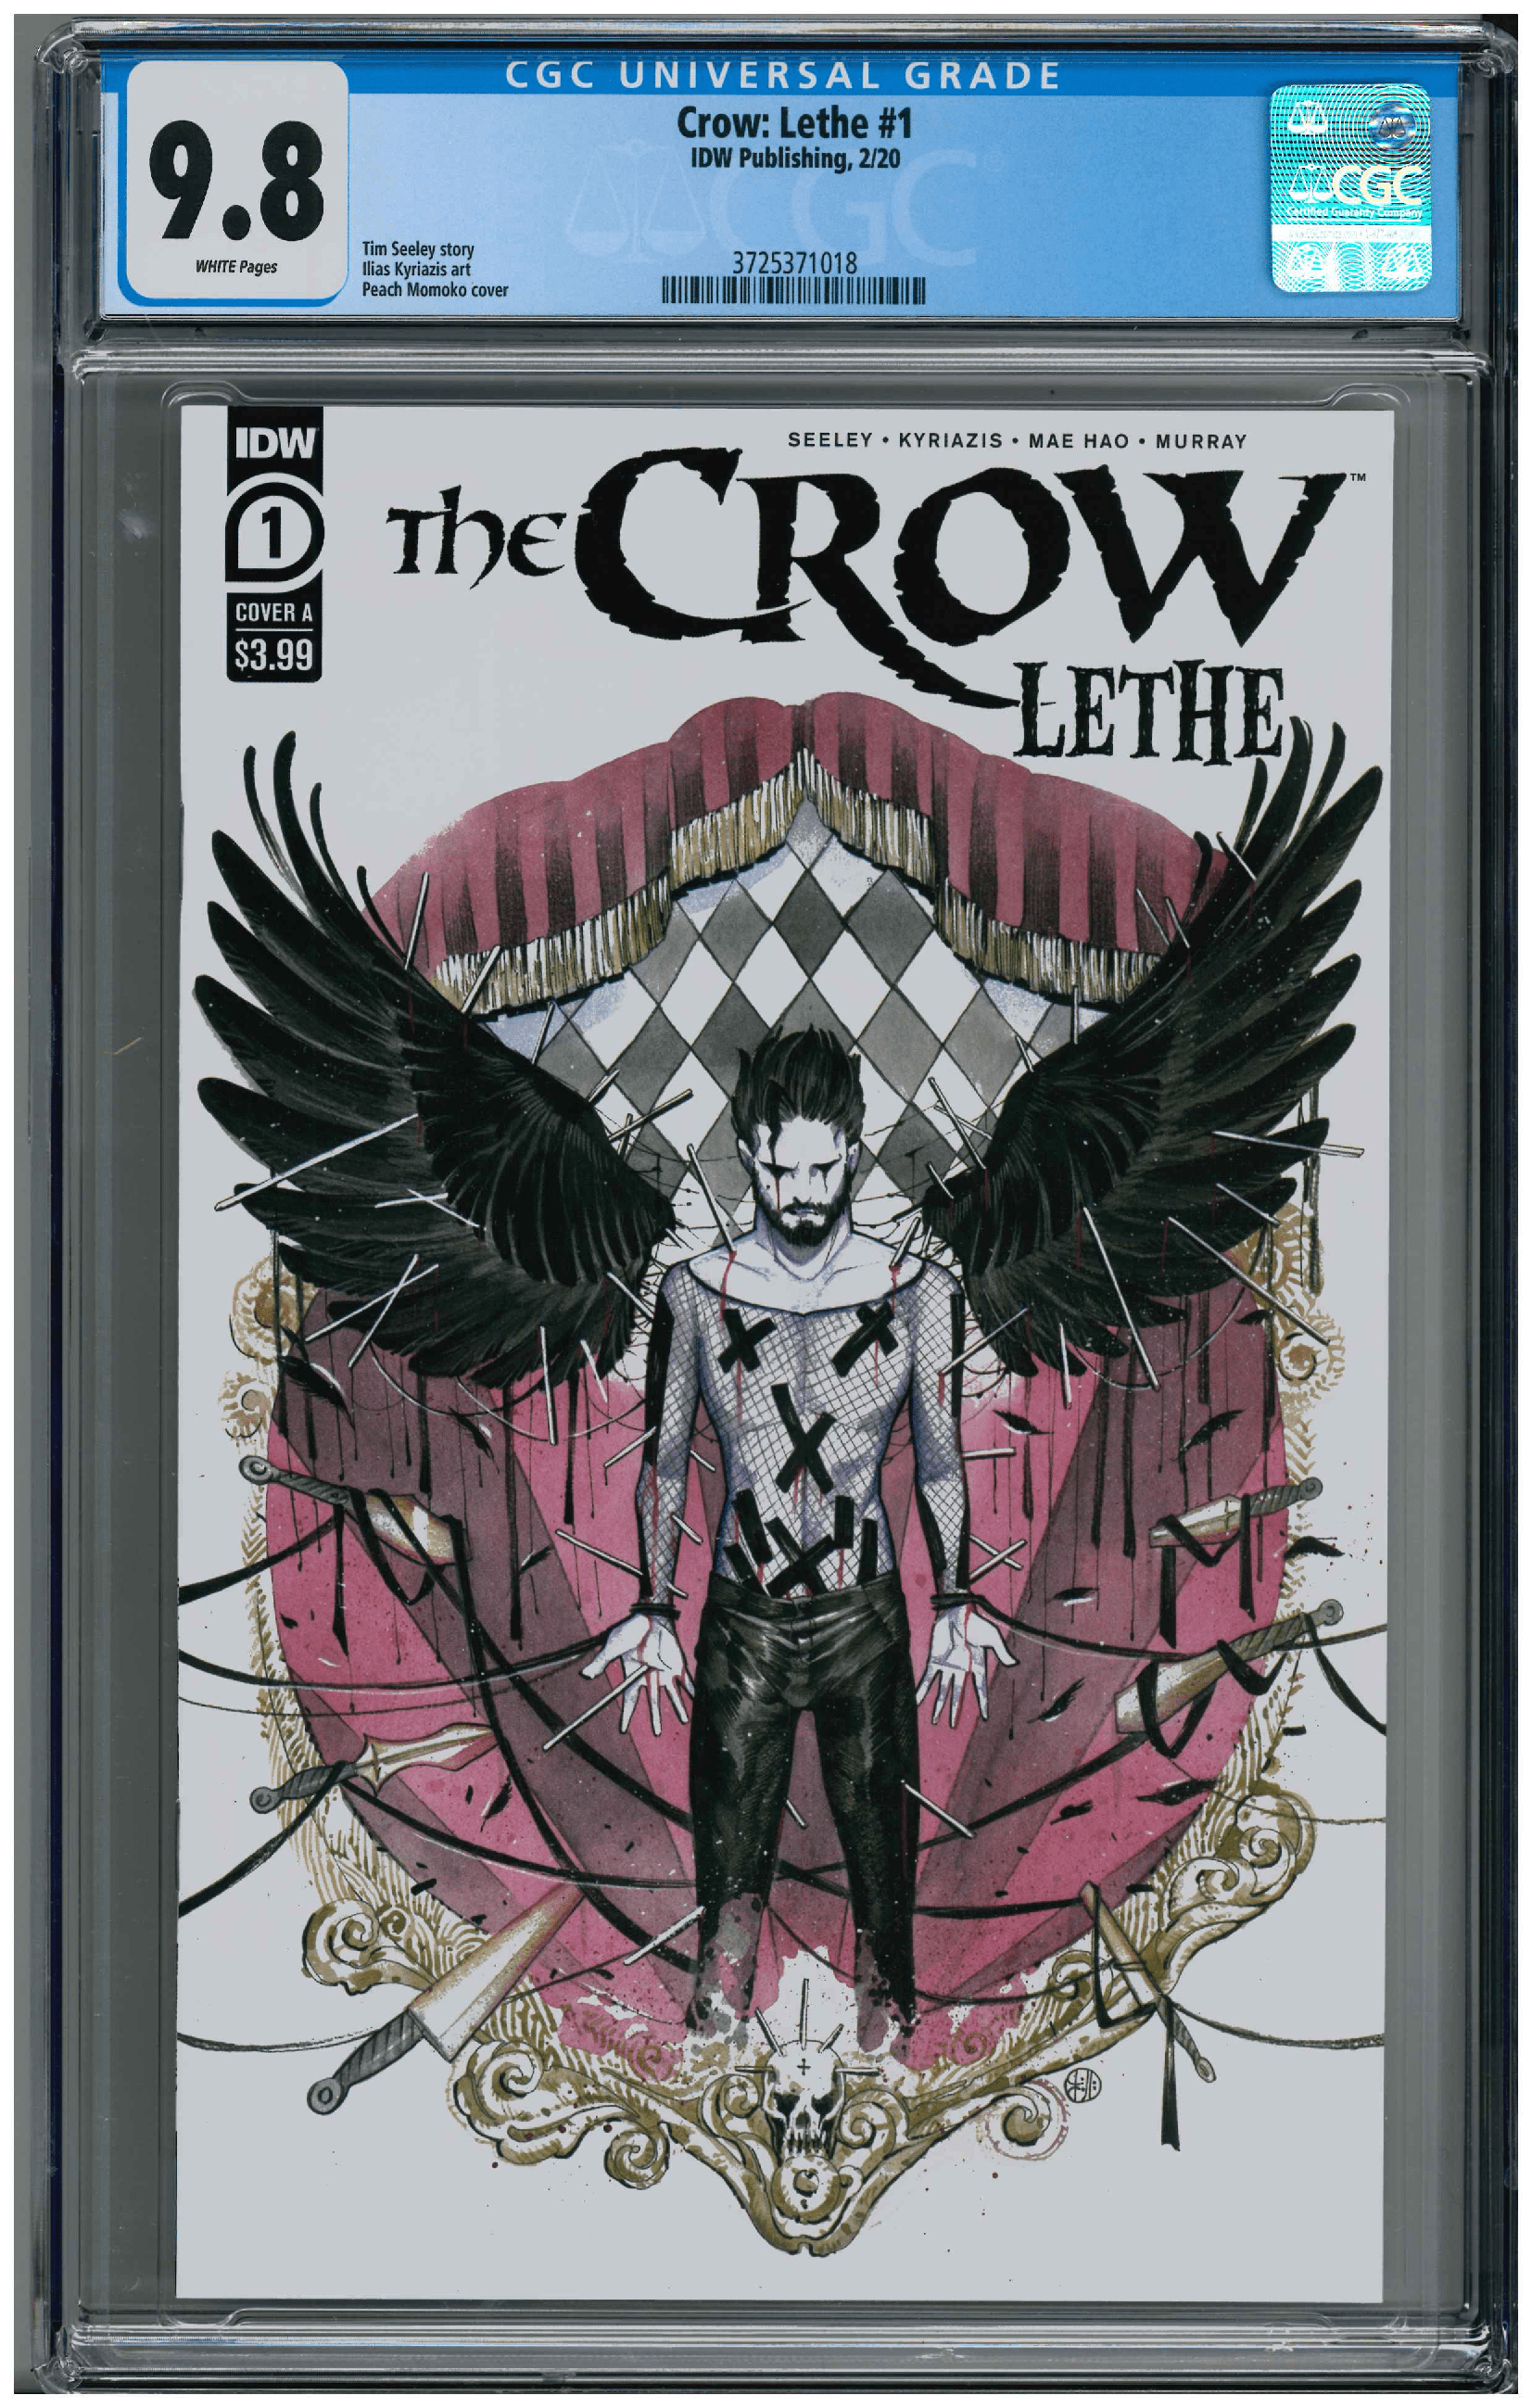 Crow: Lethe #1